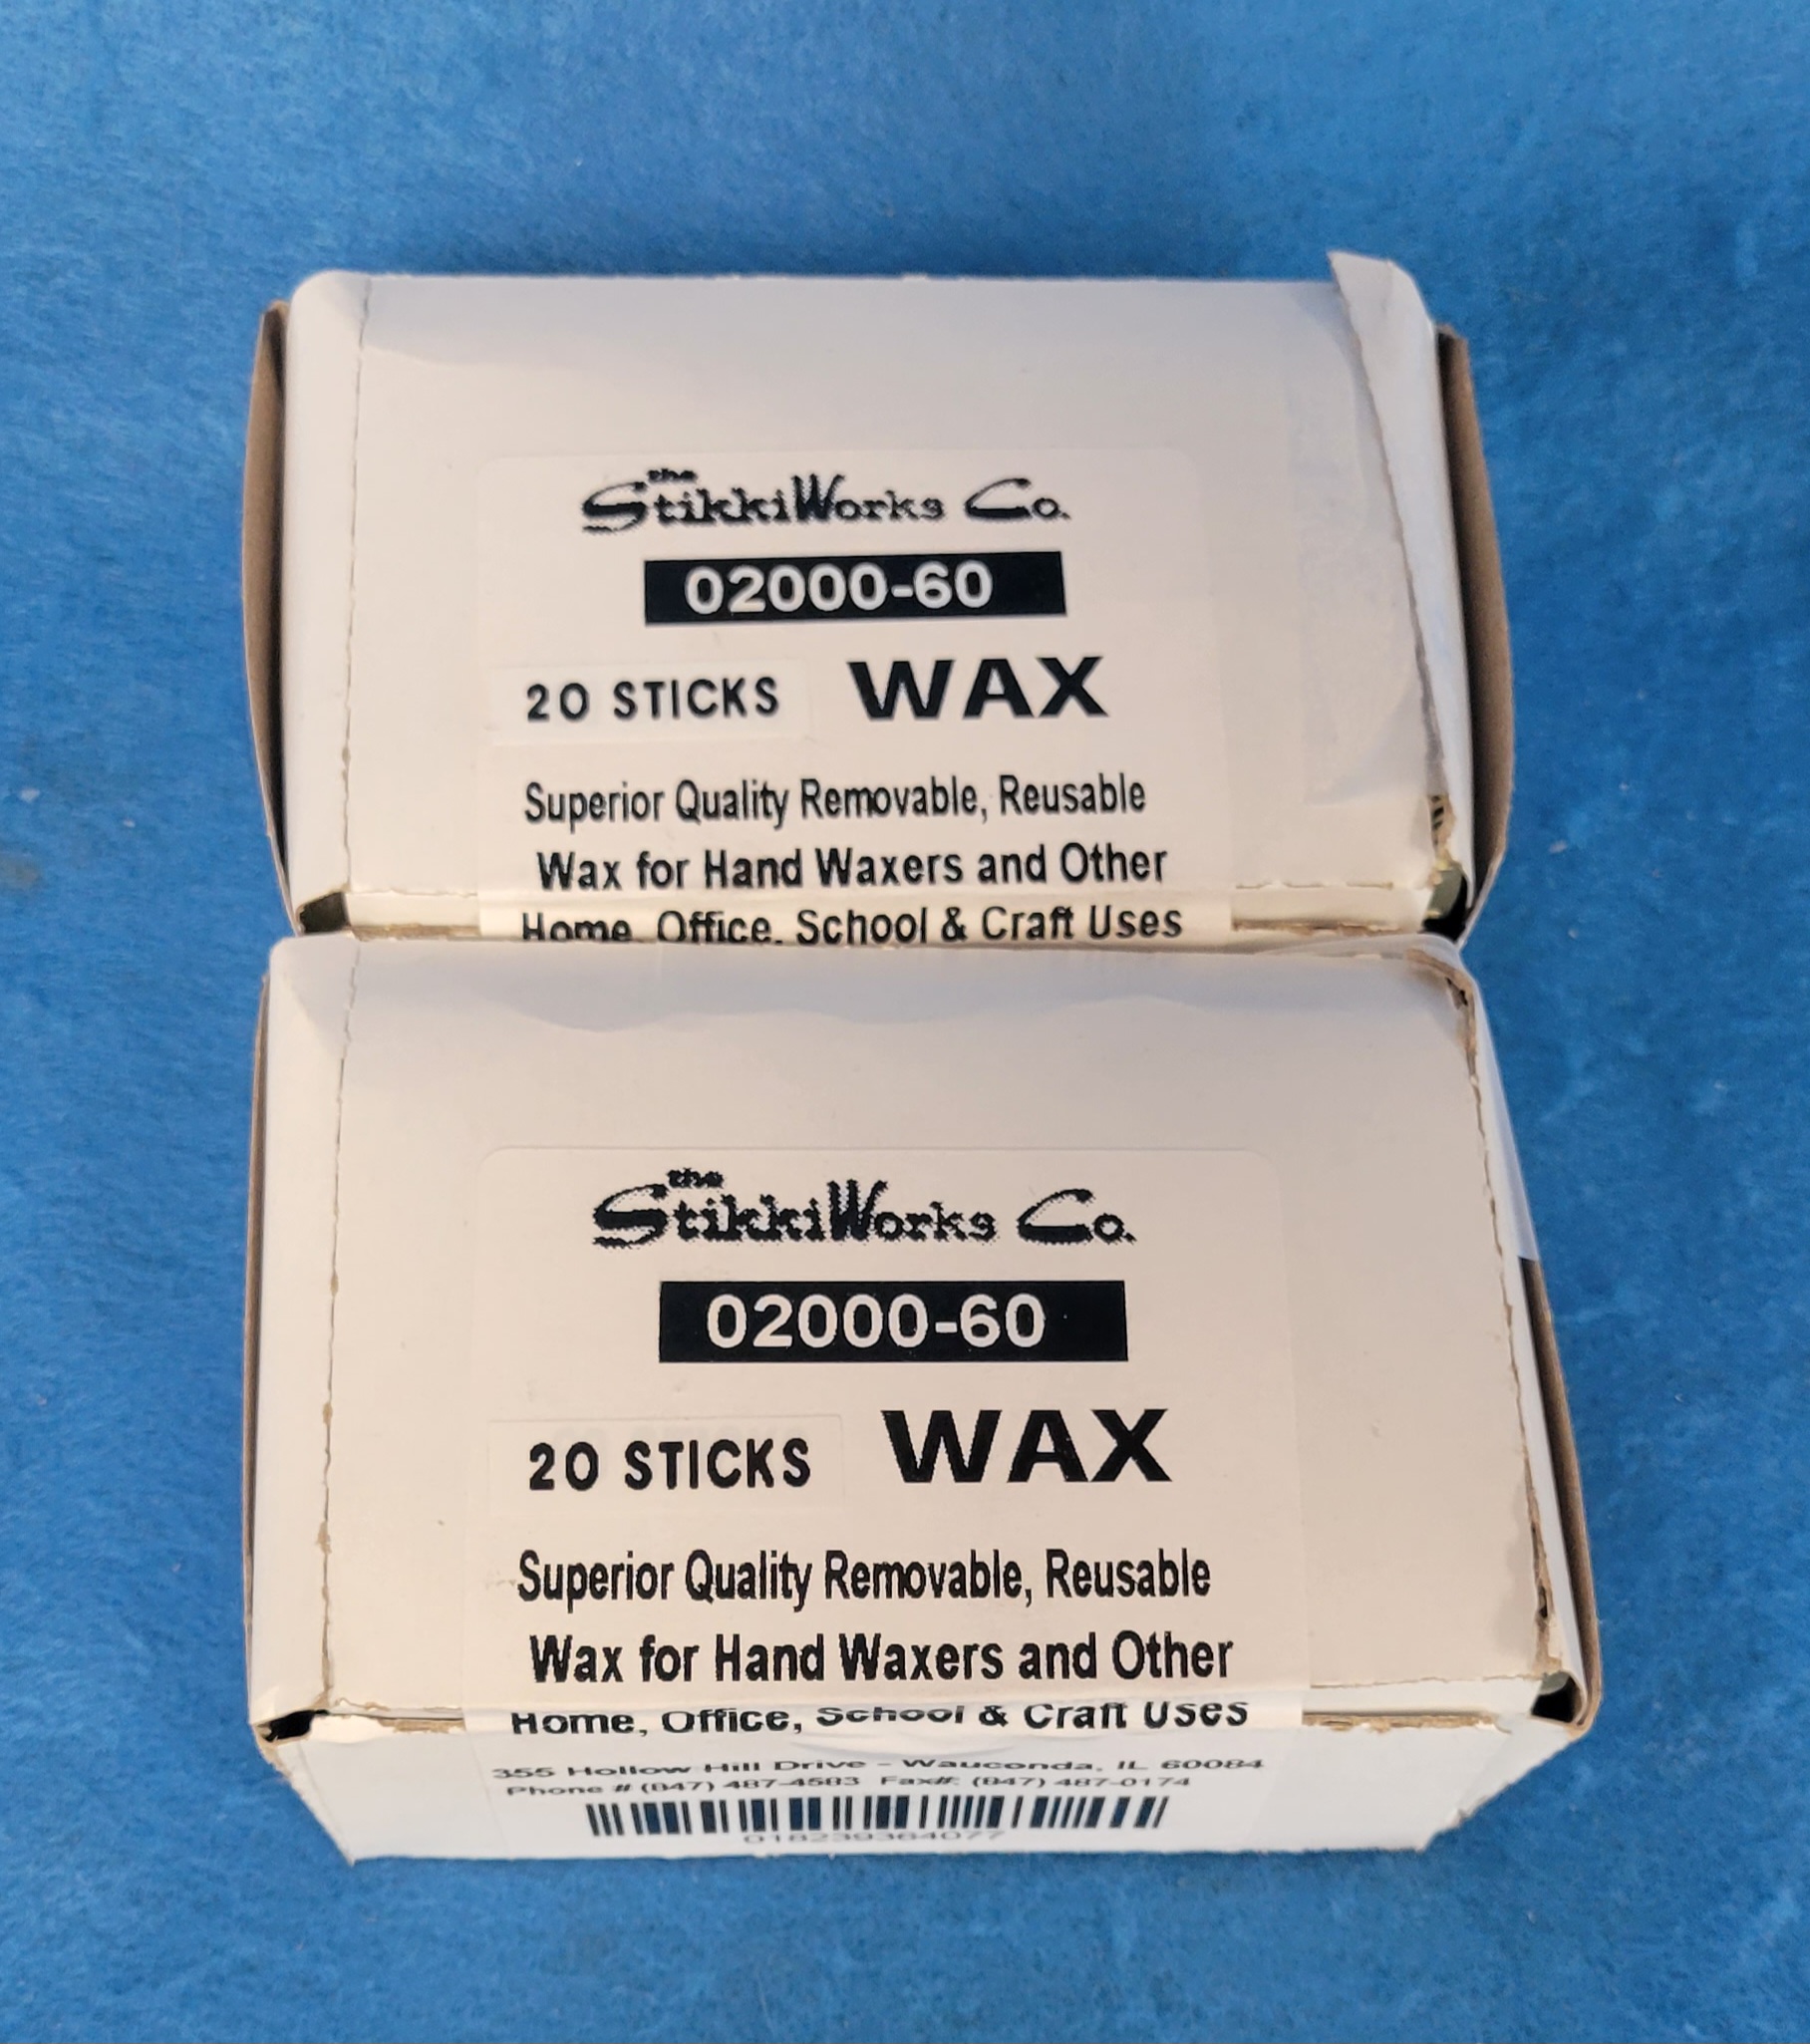 Modal Additional Images for STIKKI WAX 20 STICK 10 OZ. BOX LECTRO-STIK WAX REPLACEMENT